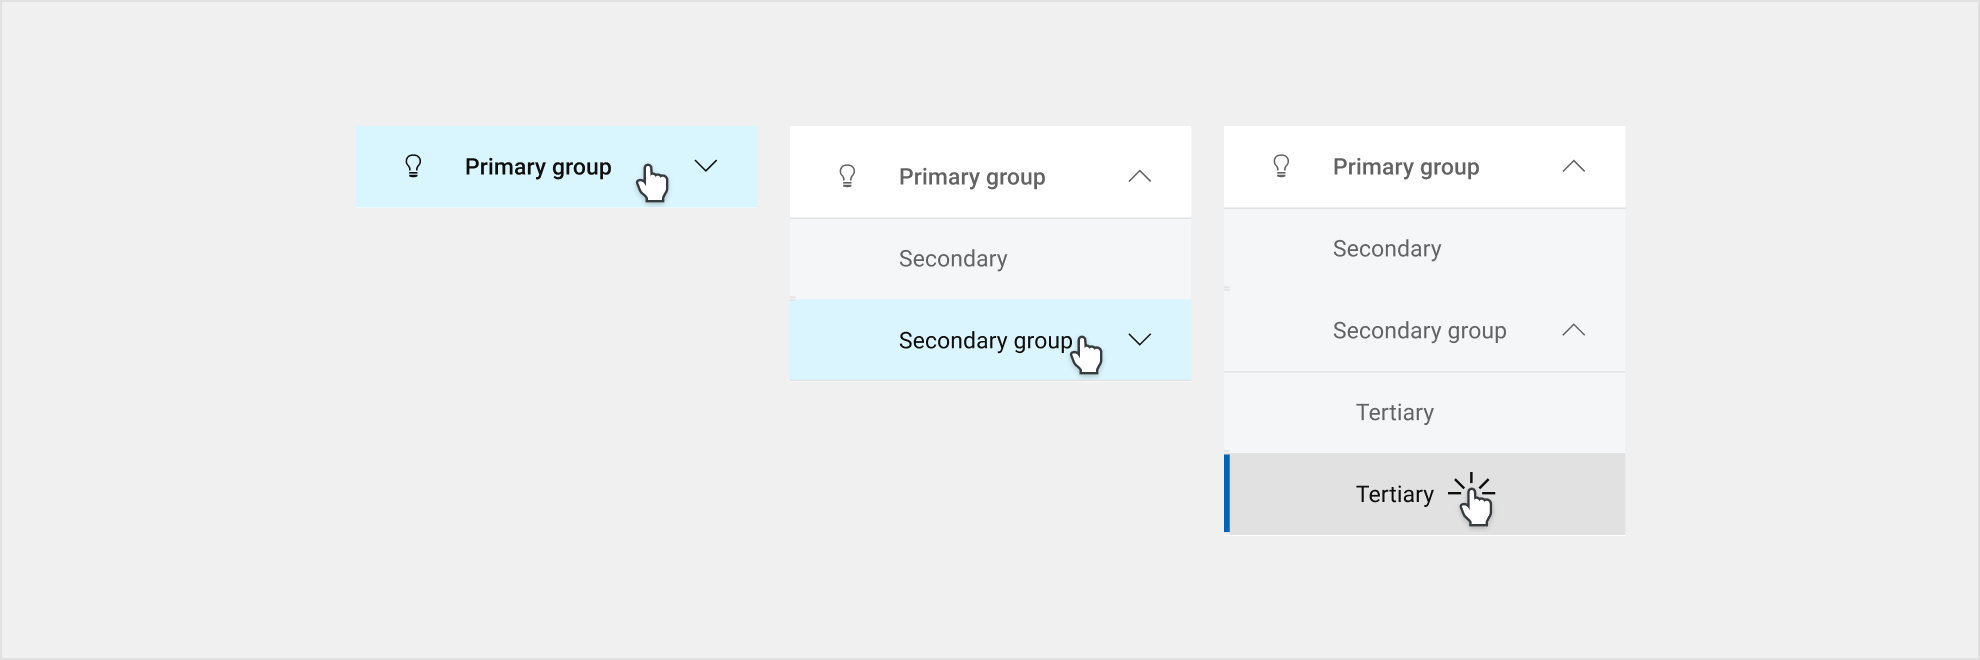 Selecting a primary group reveals the secondary page levels. Secondary groups function similarly, in that selecting the page drops down tertiary page levels. 